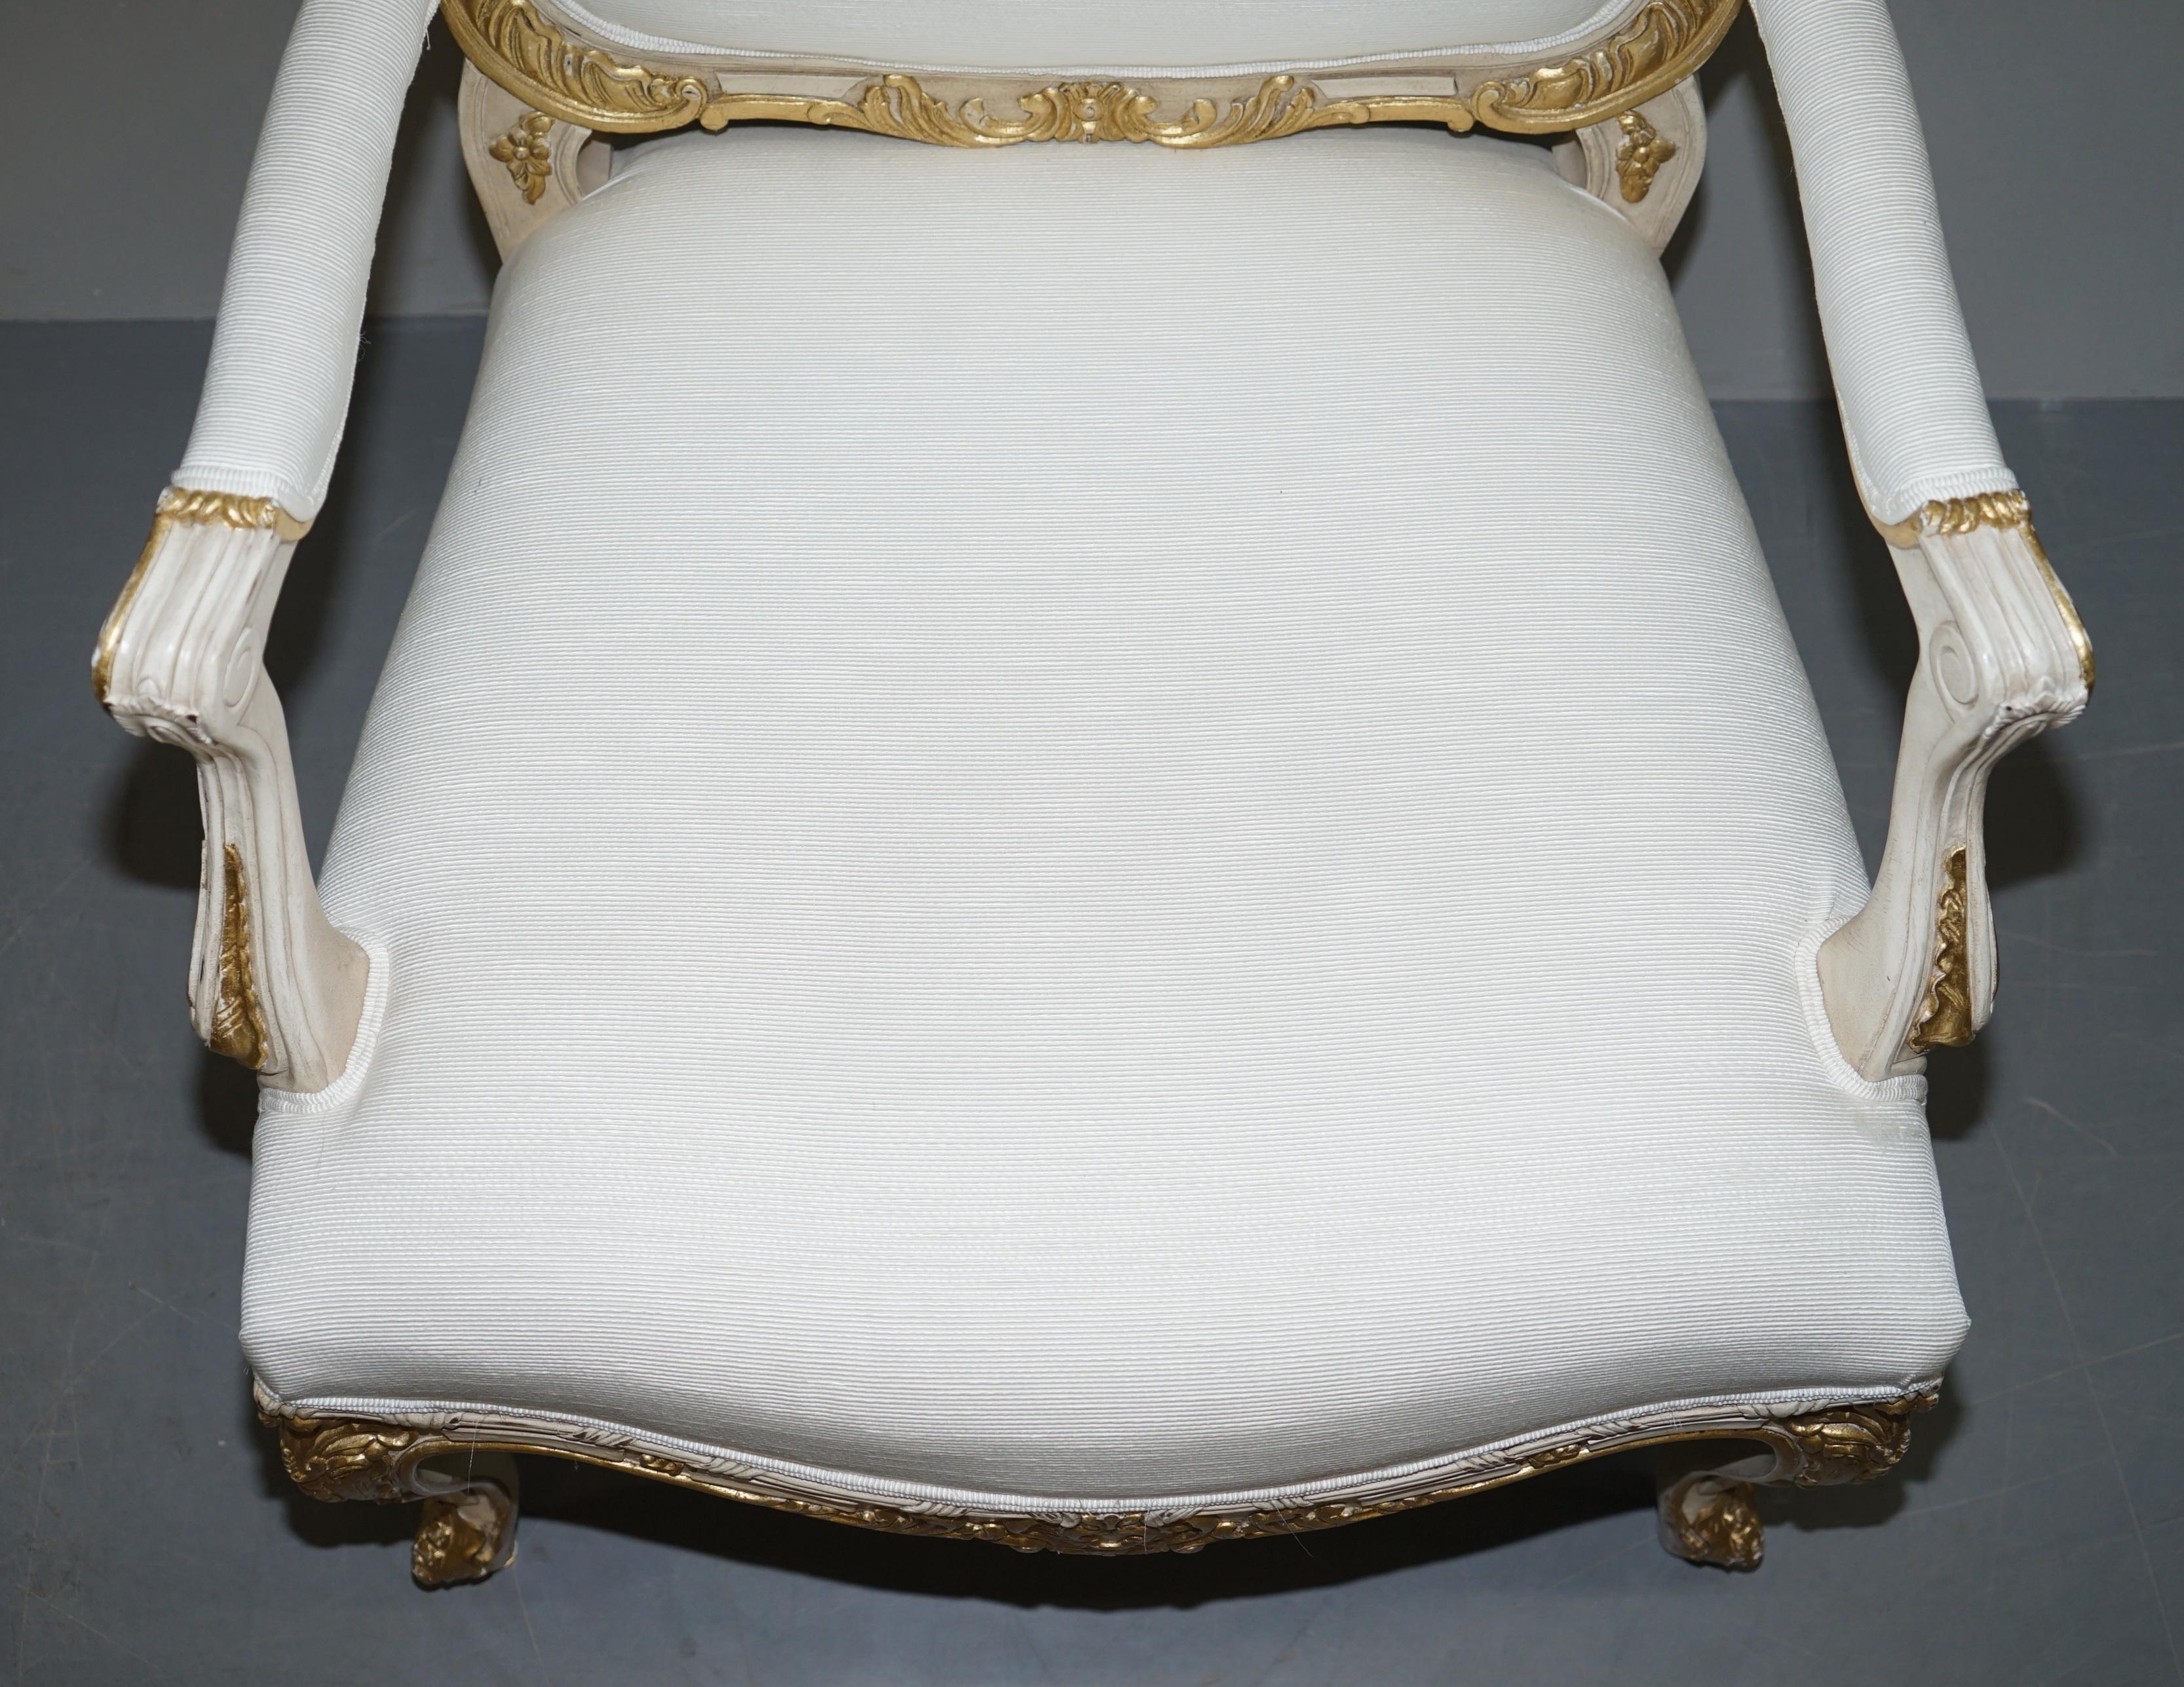 French Provincial Sublime Ralph Lauren Indian Cove Lodge Fauteuil from the Cannes Estate Suite